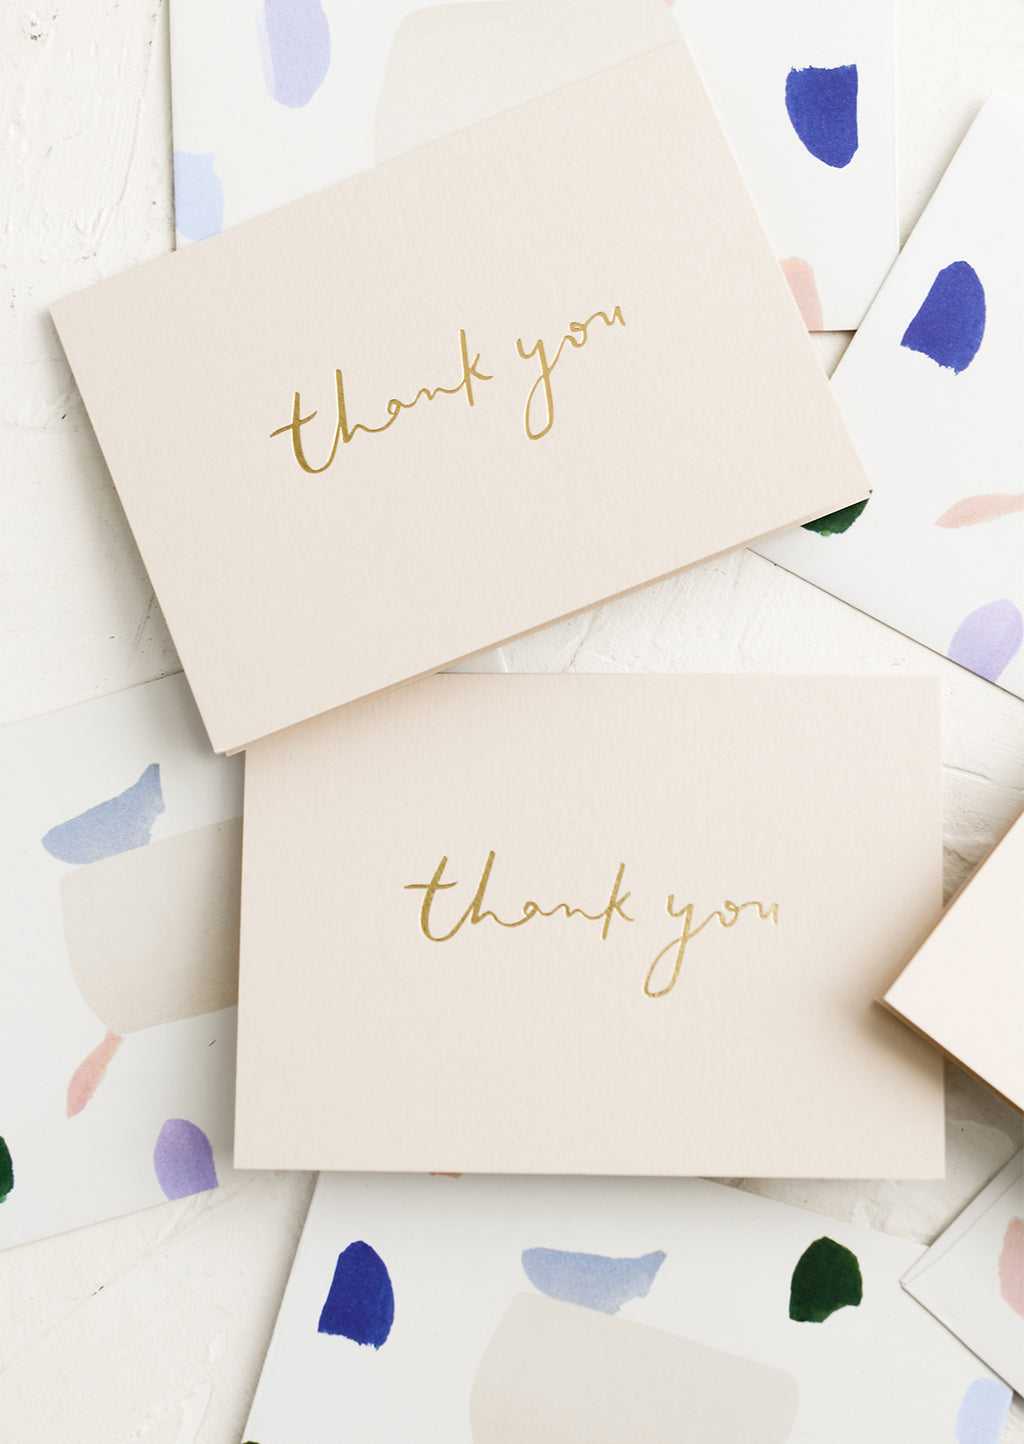 Art Stroke: Thank you cards with patterned envelopes.